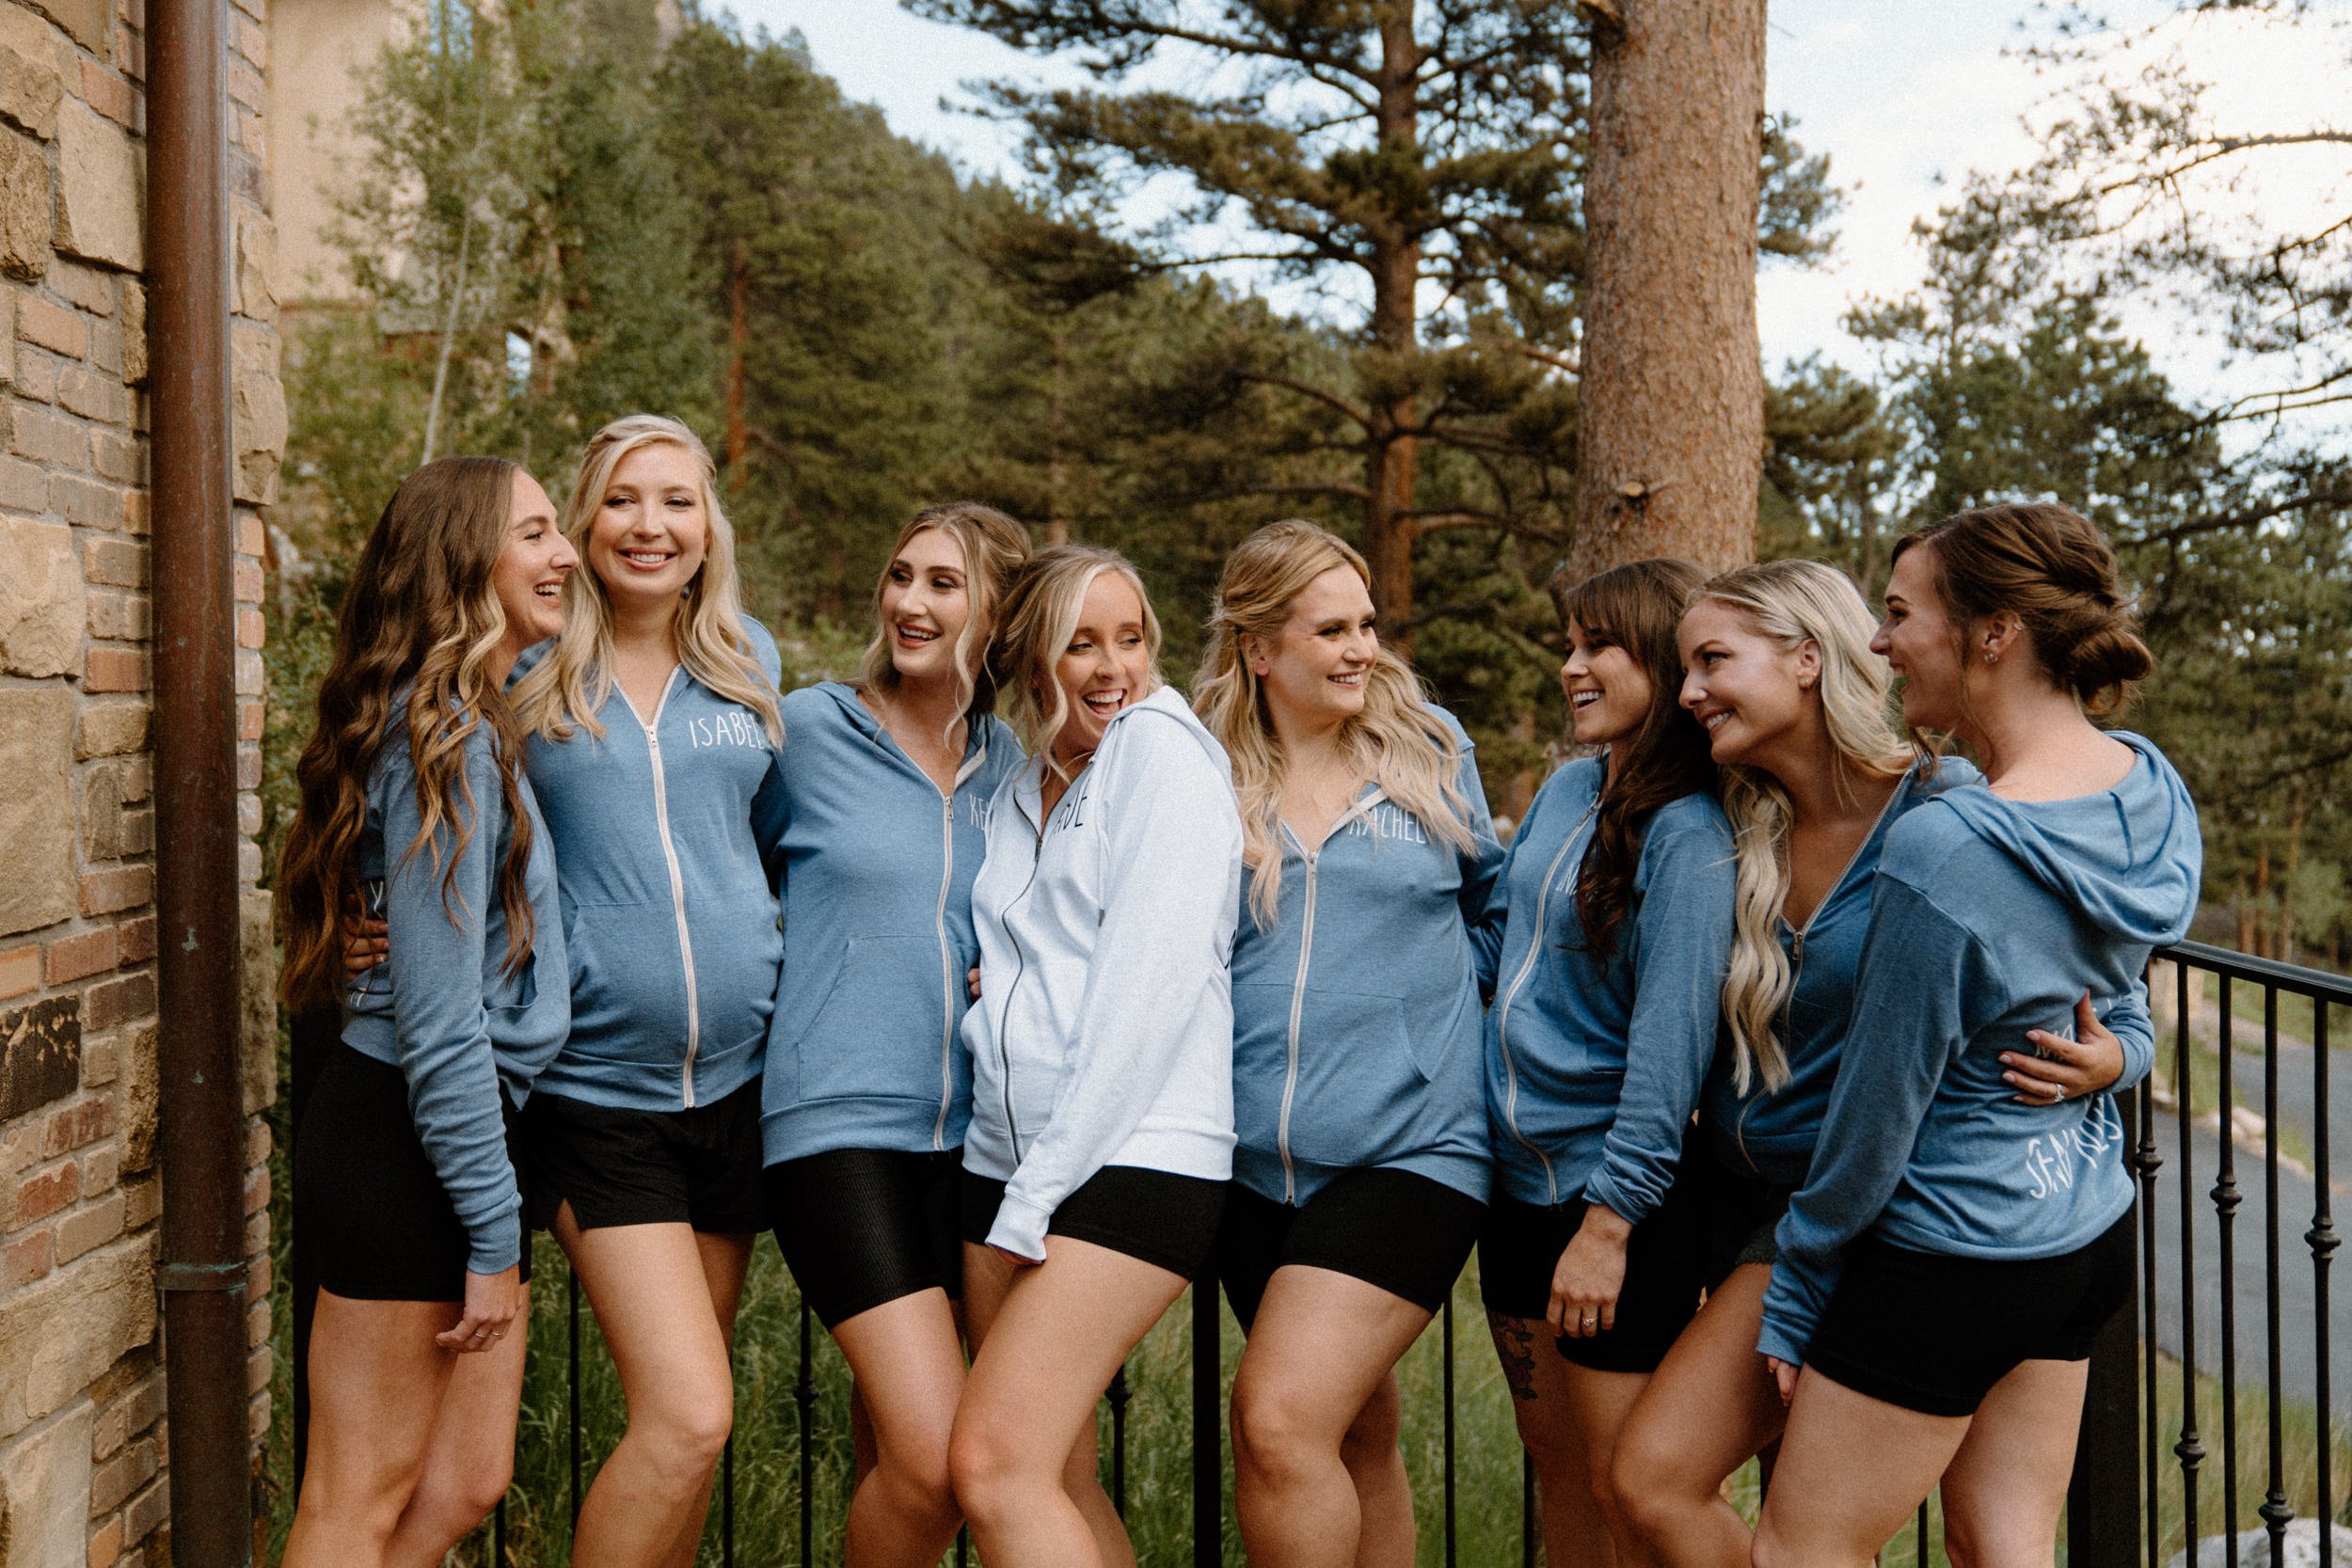 The bride poses with her bridesmaids in matching blue jackets